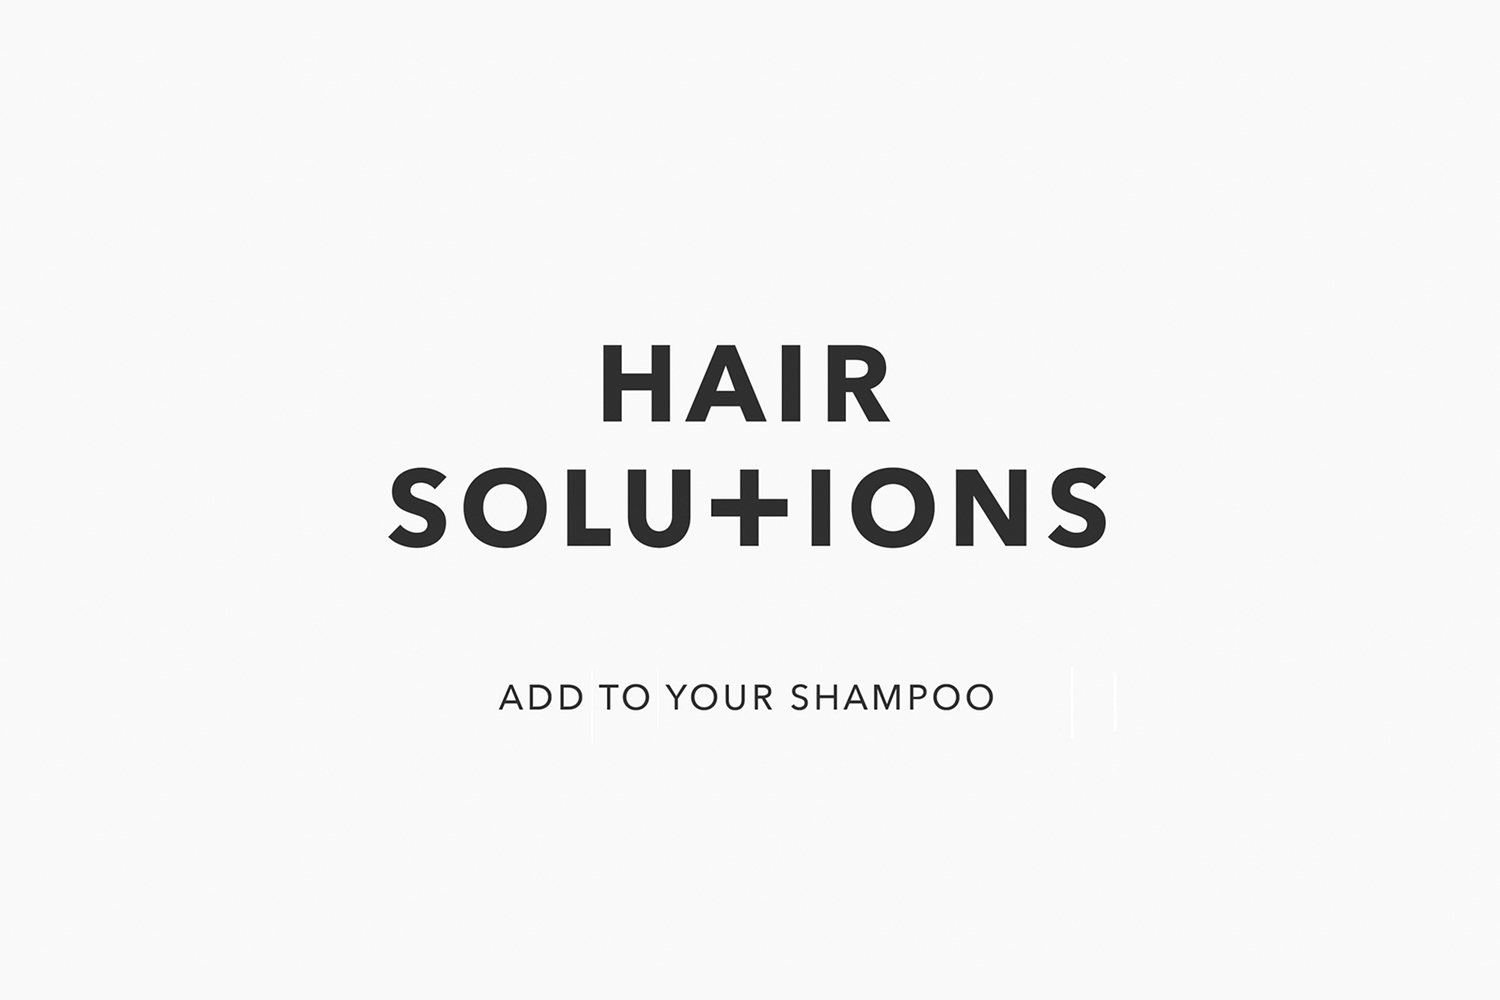 Logo, branding, packaging and campaign by Paul Belford Ltd. for Hair Solutions, a personalised shampoo enhancer